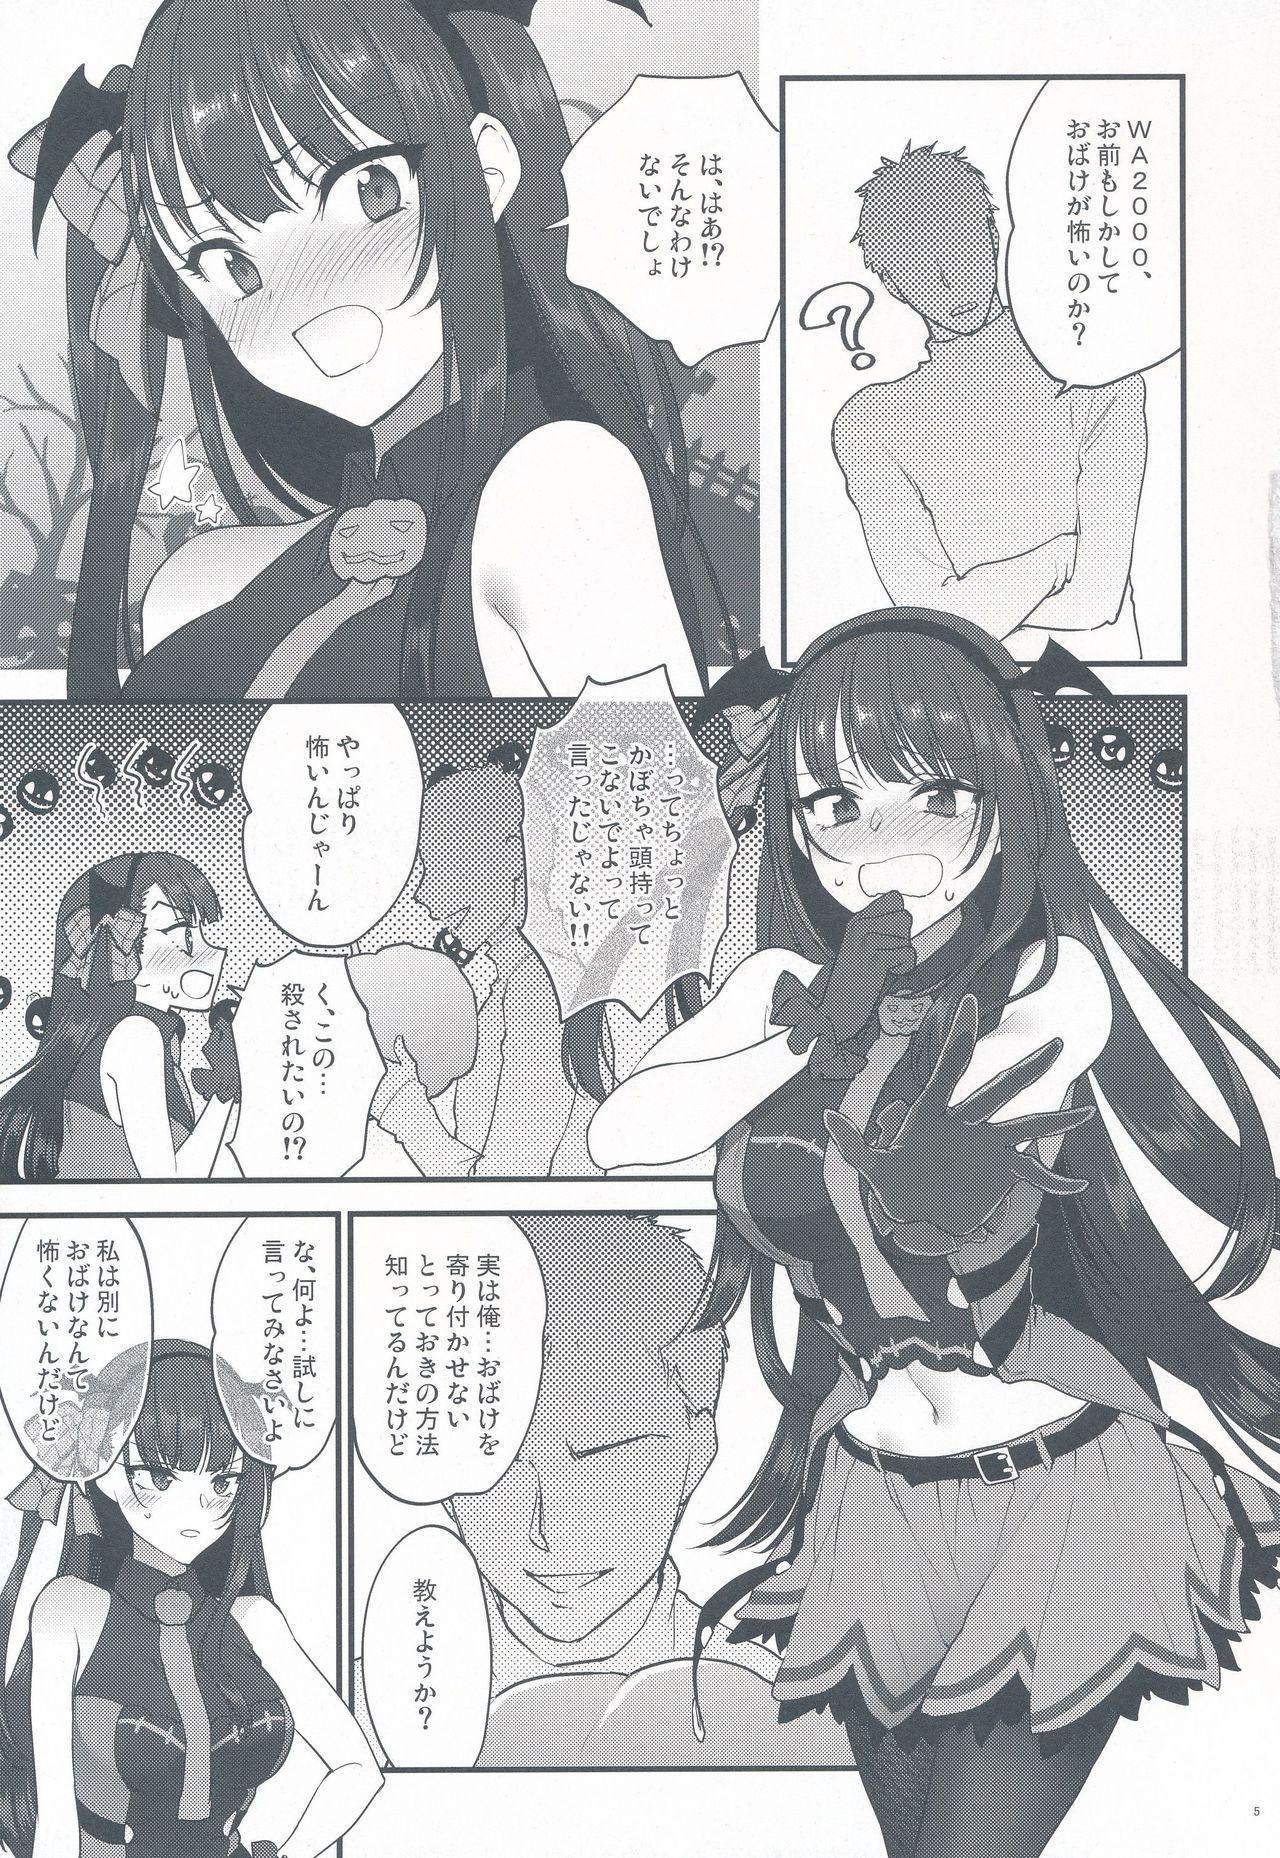 Tight Pussy Porn Obake nante Inai! - Girls frontline Ladyboy - Page 5